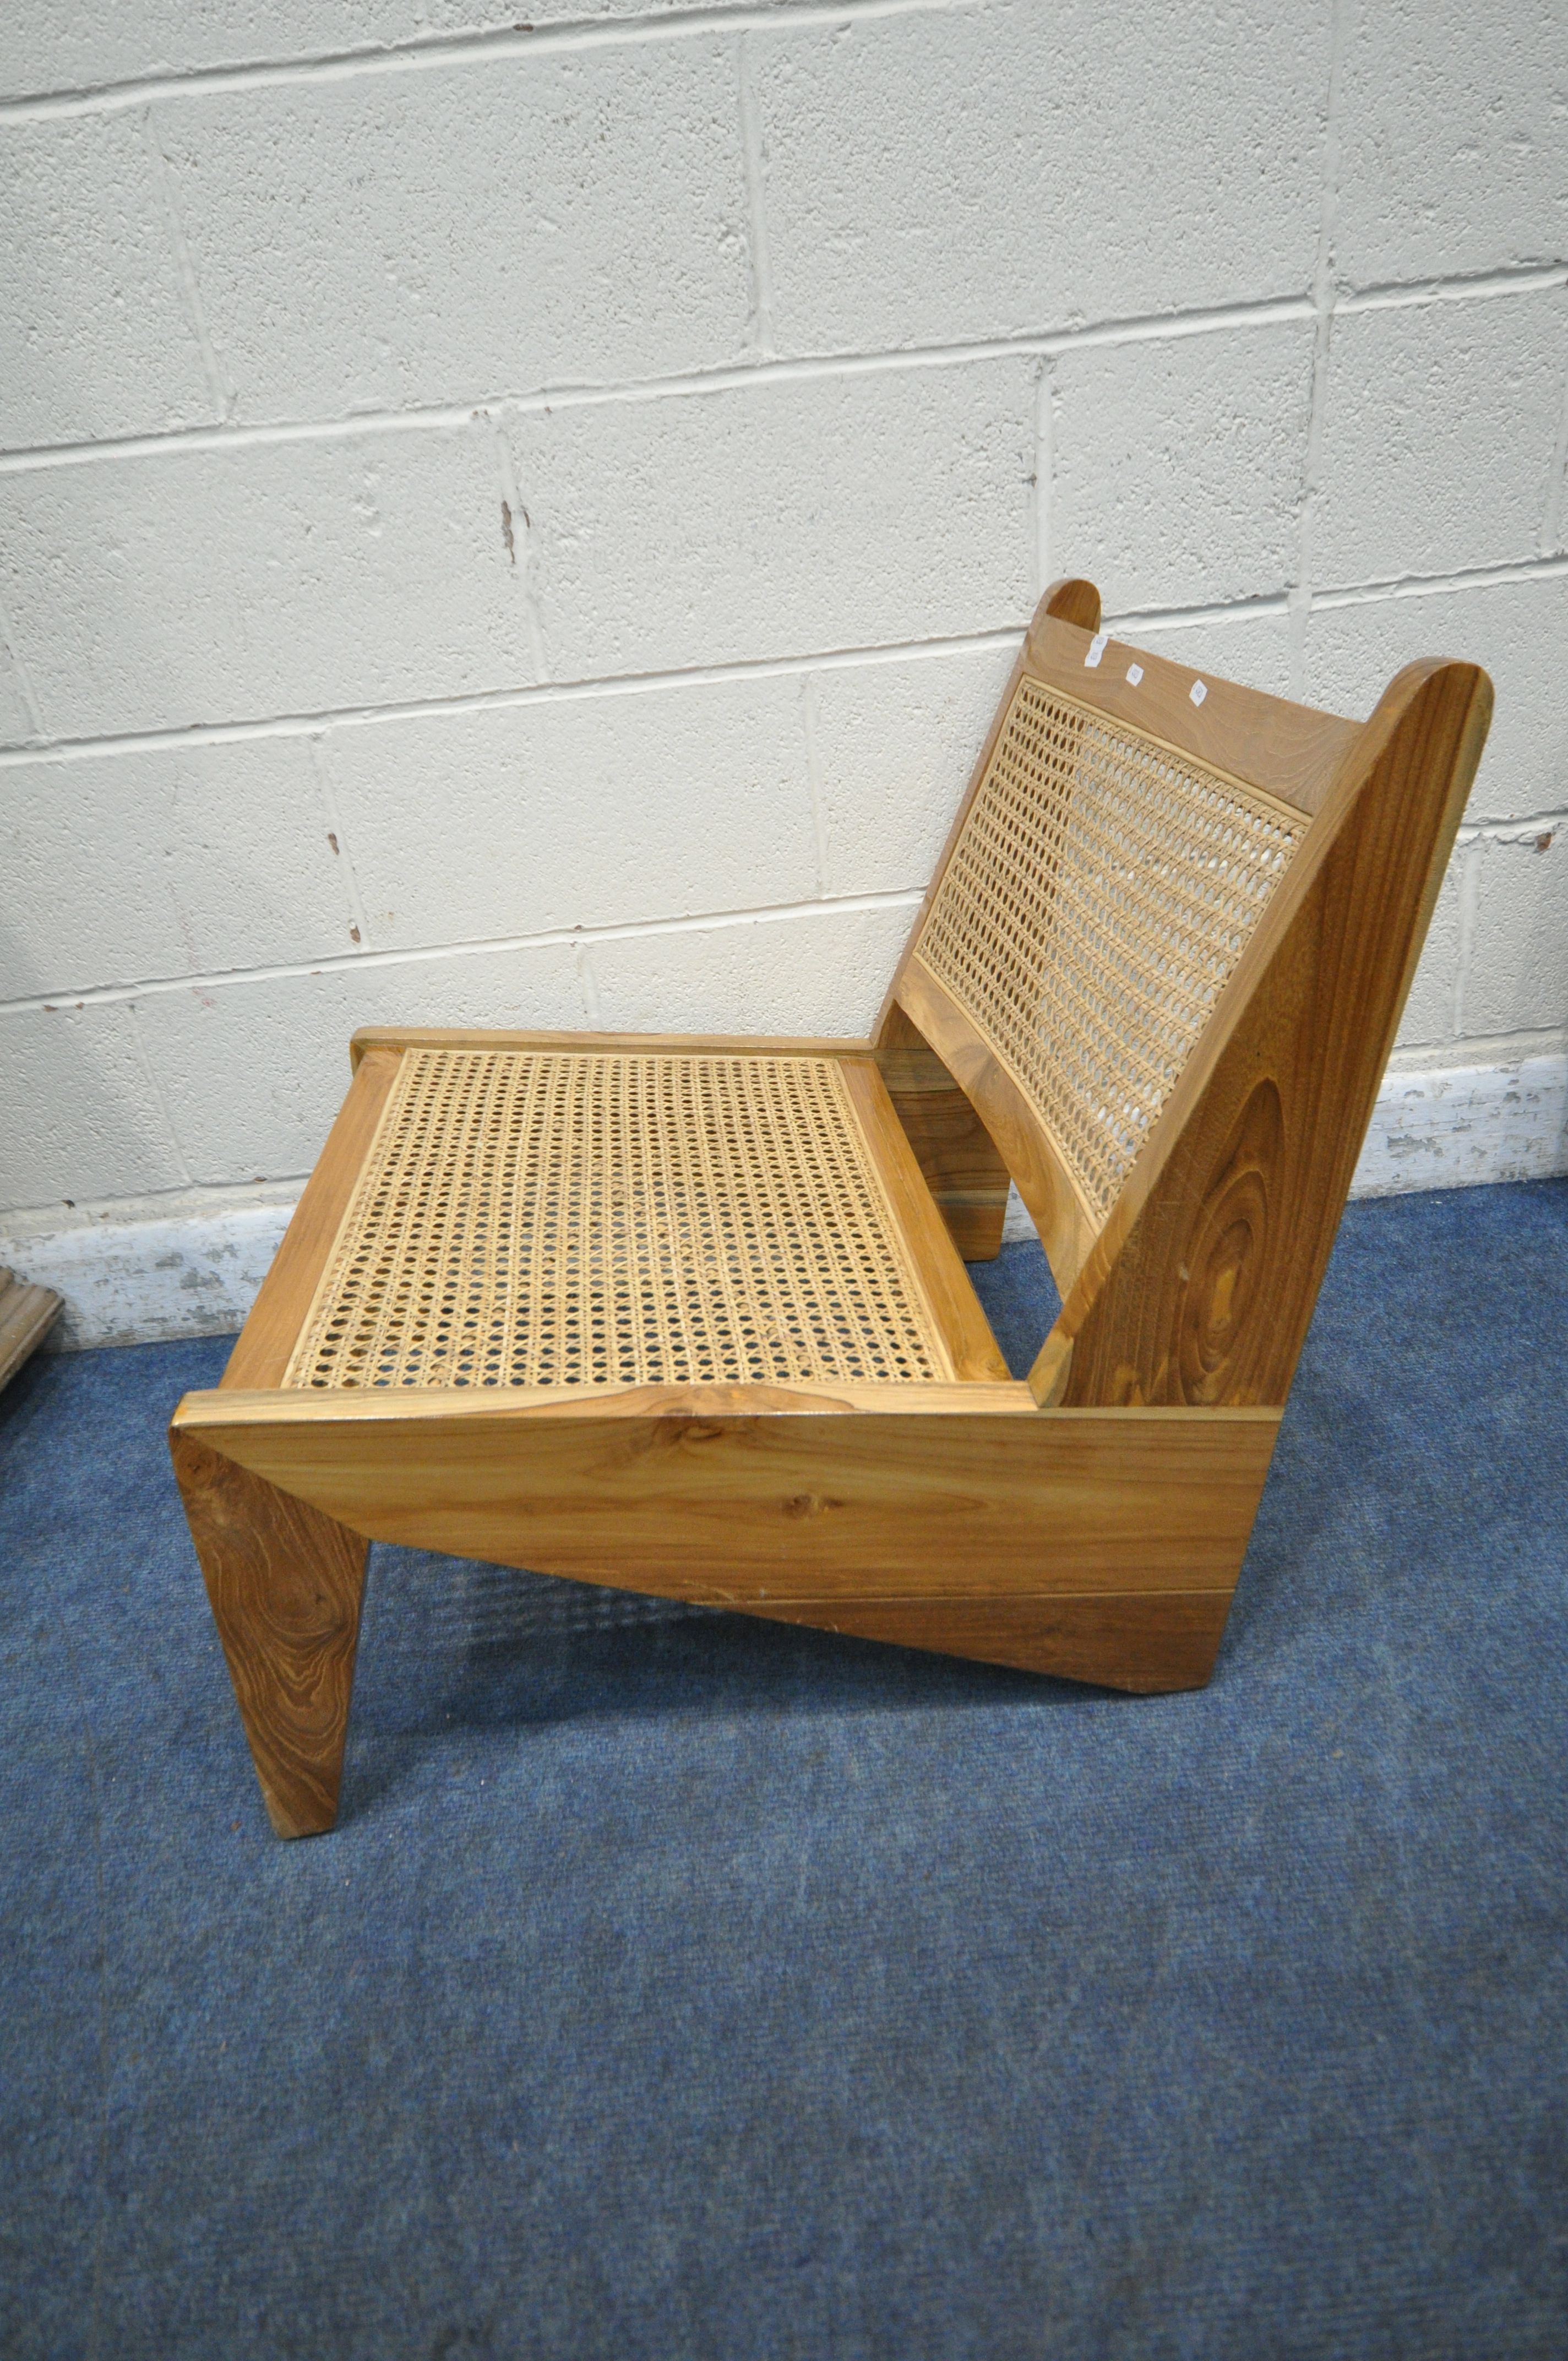 IN THE MANNER OF PIERRE JEANNERET FOR CHANDIGARH, A MID CENTURY HARDWOOD KANGAROO CHAIR, with cane - Image 4 of 5